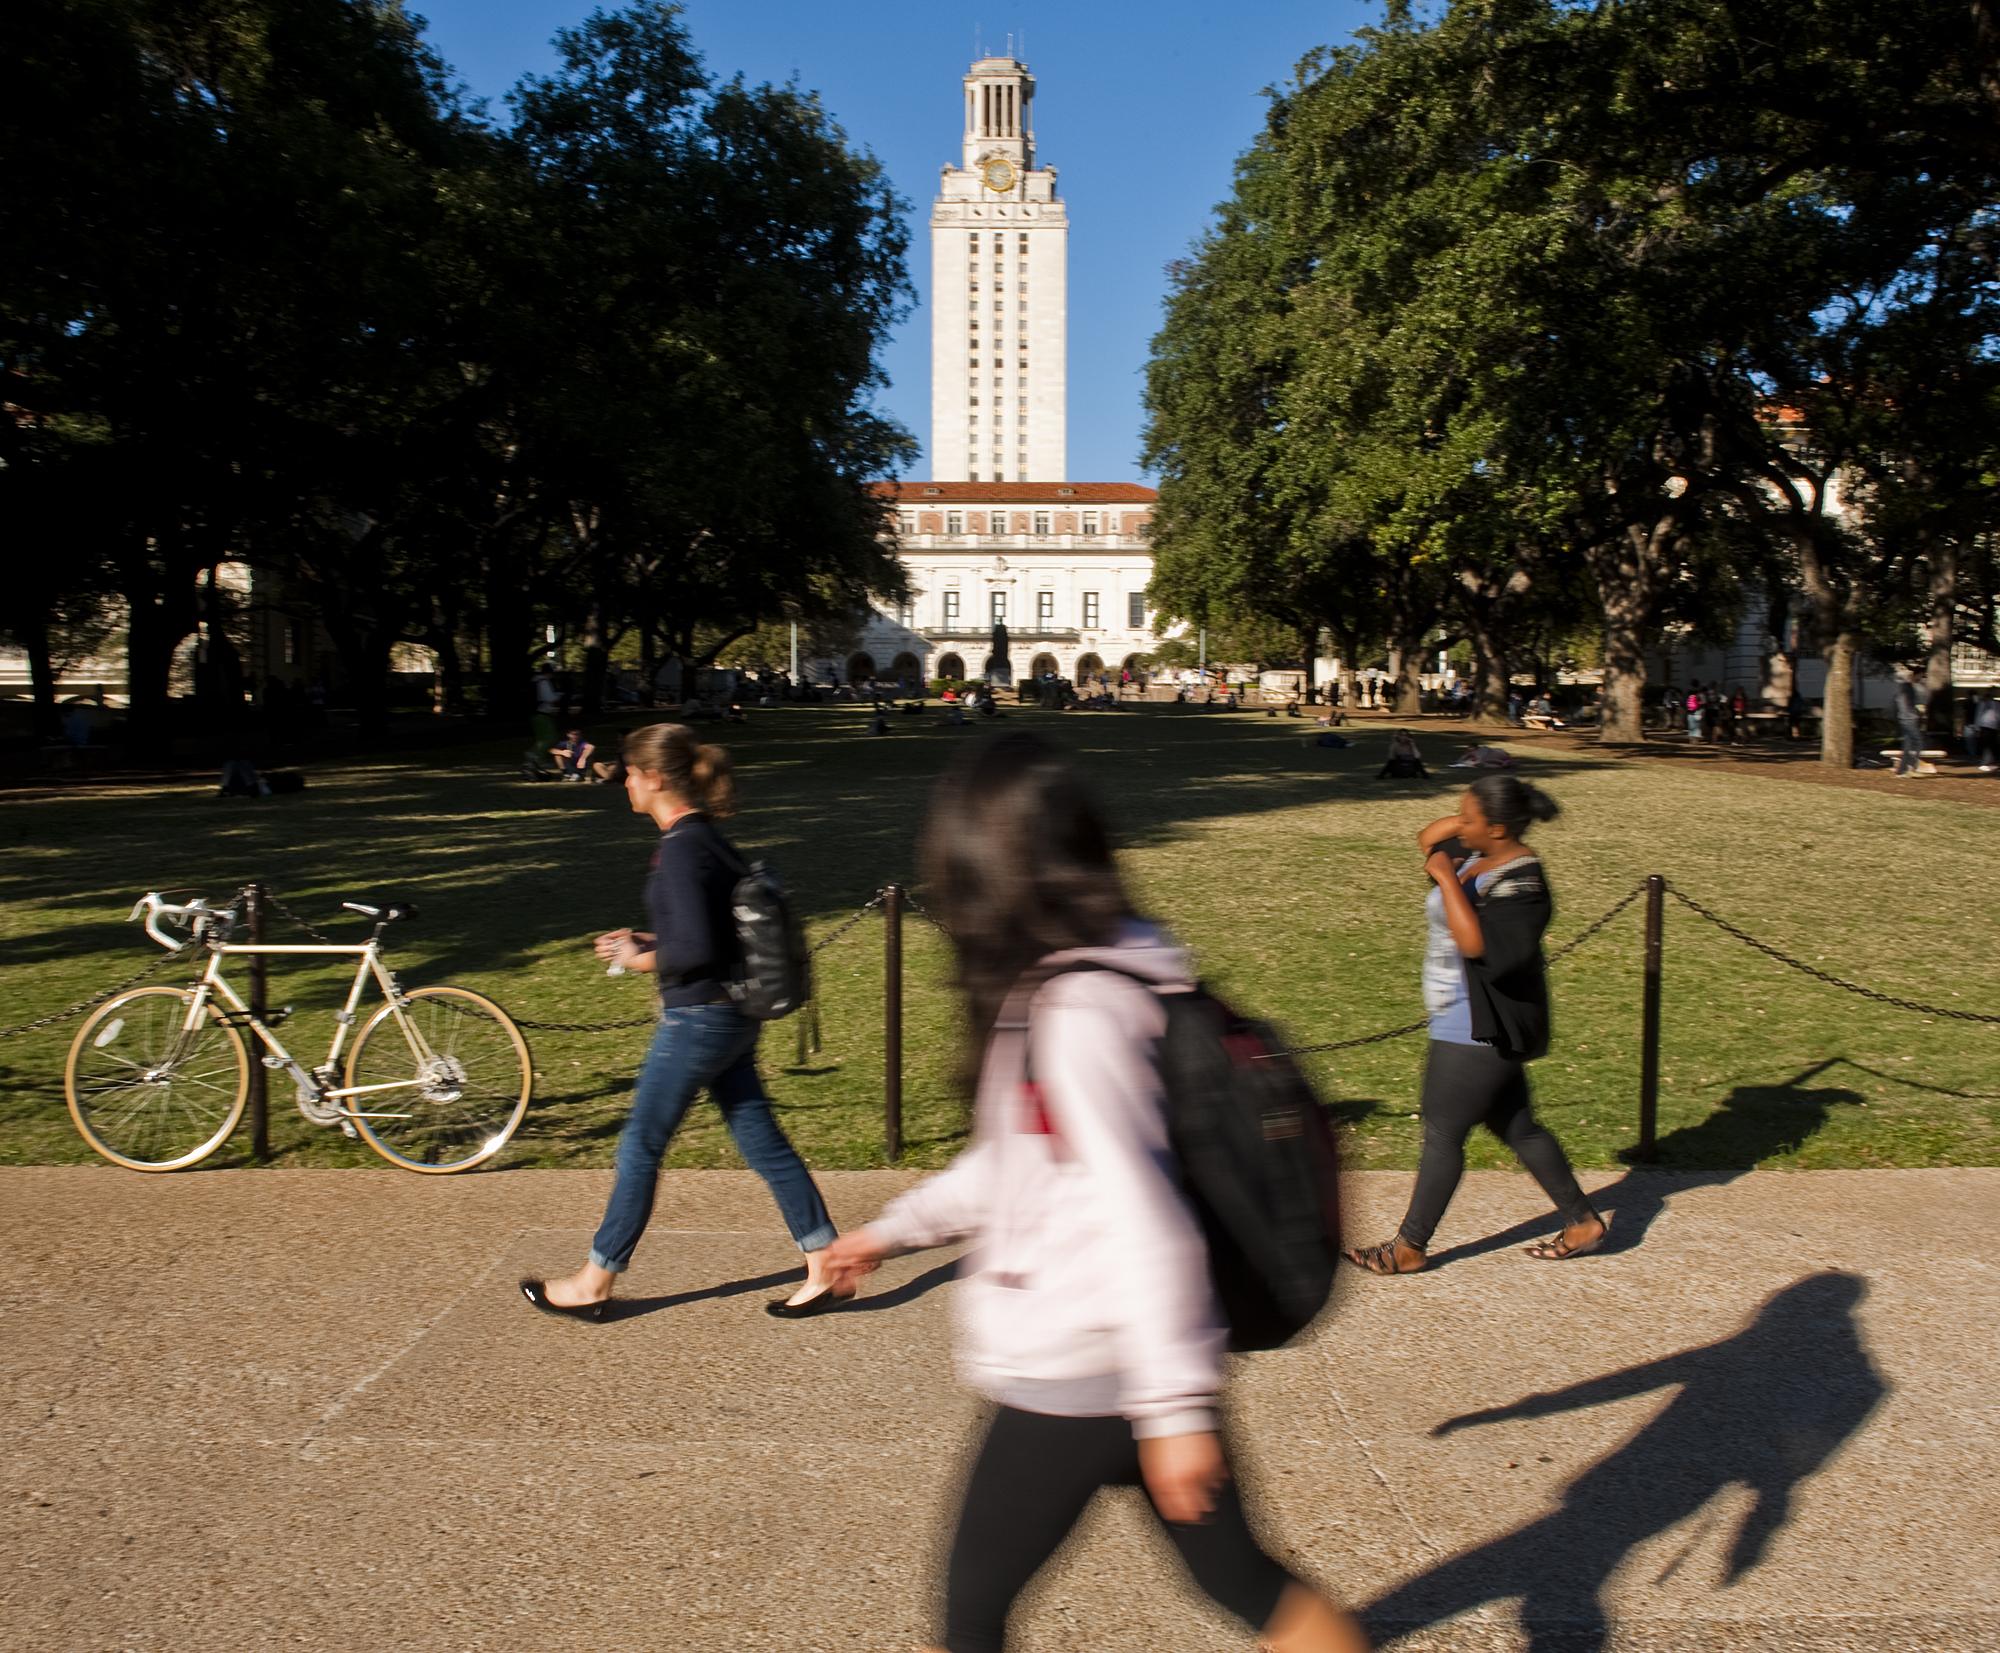 With oil’s help, University of Texas endowment hits 31 billion